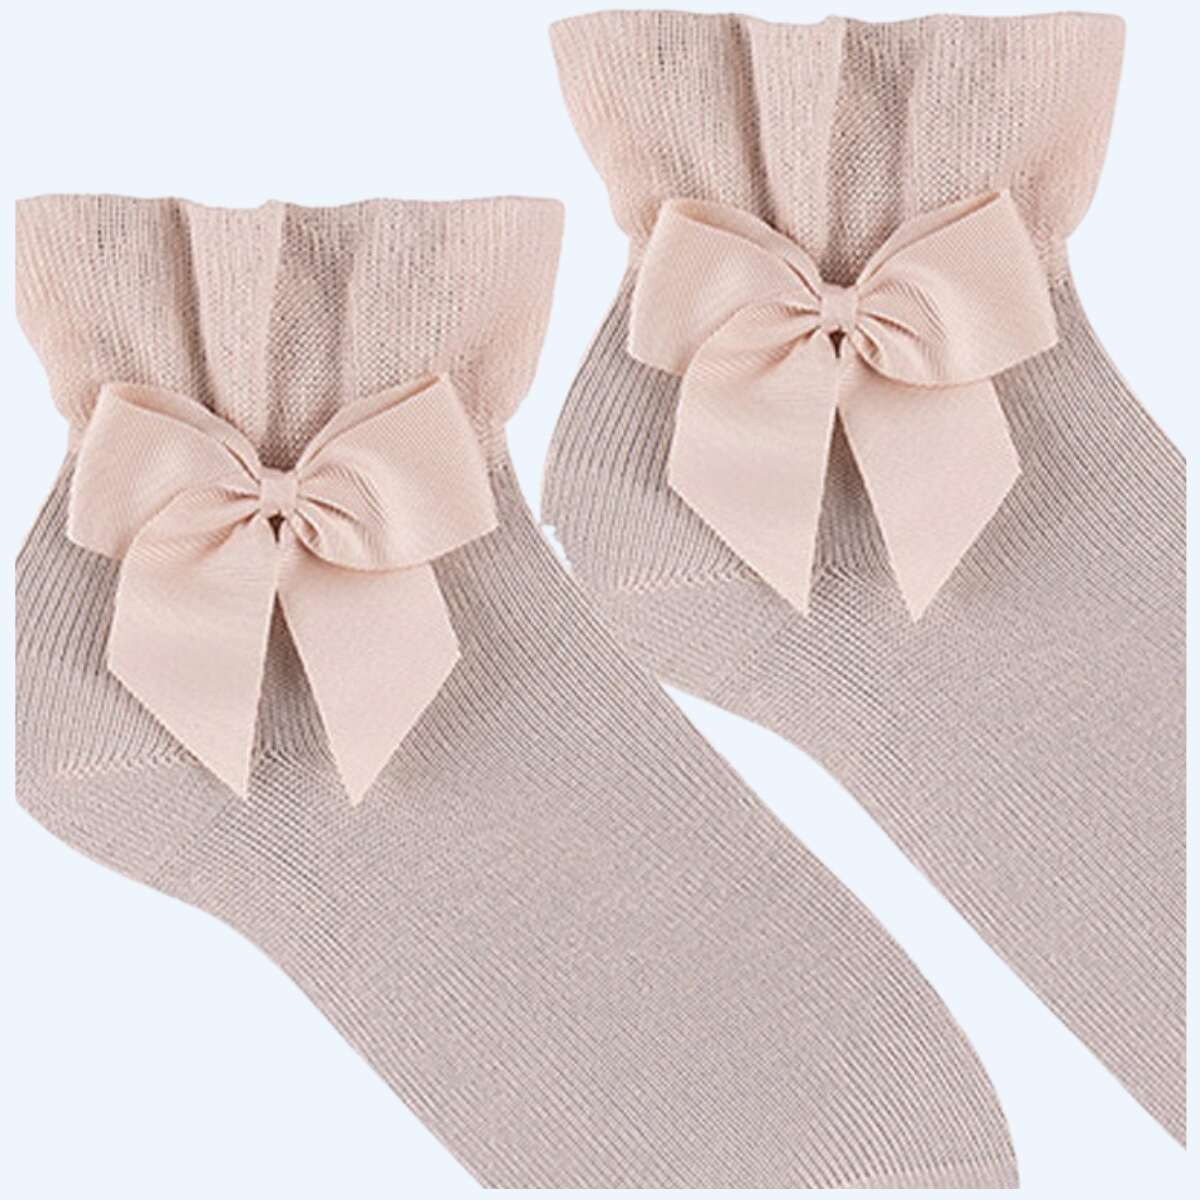 CEREMONY ANKLE SOCKSWITH GROSSGRAIN BOW CONDOR - 7